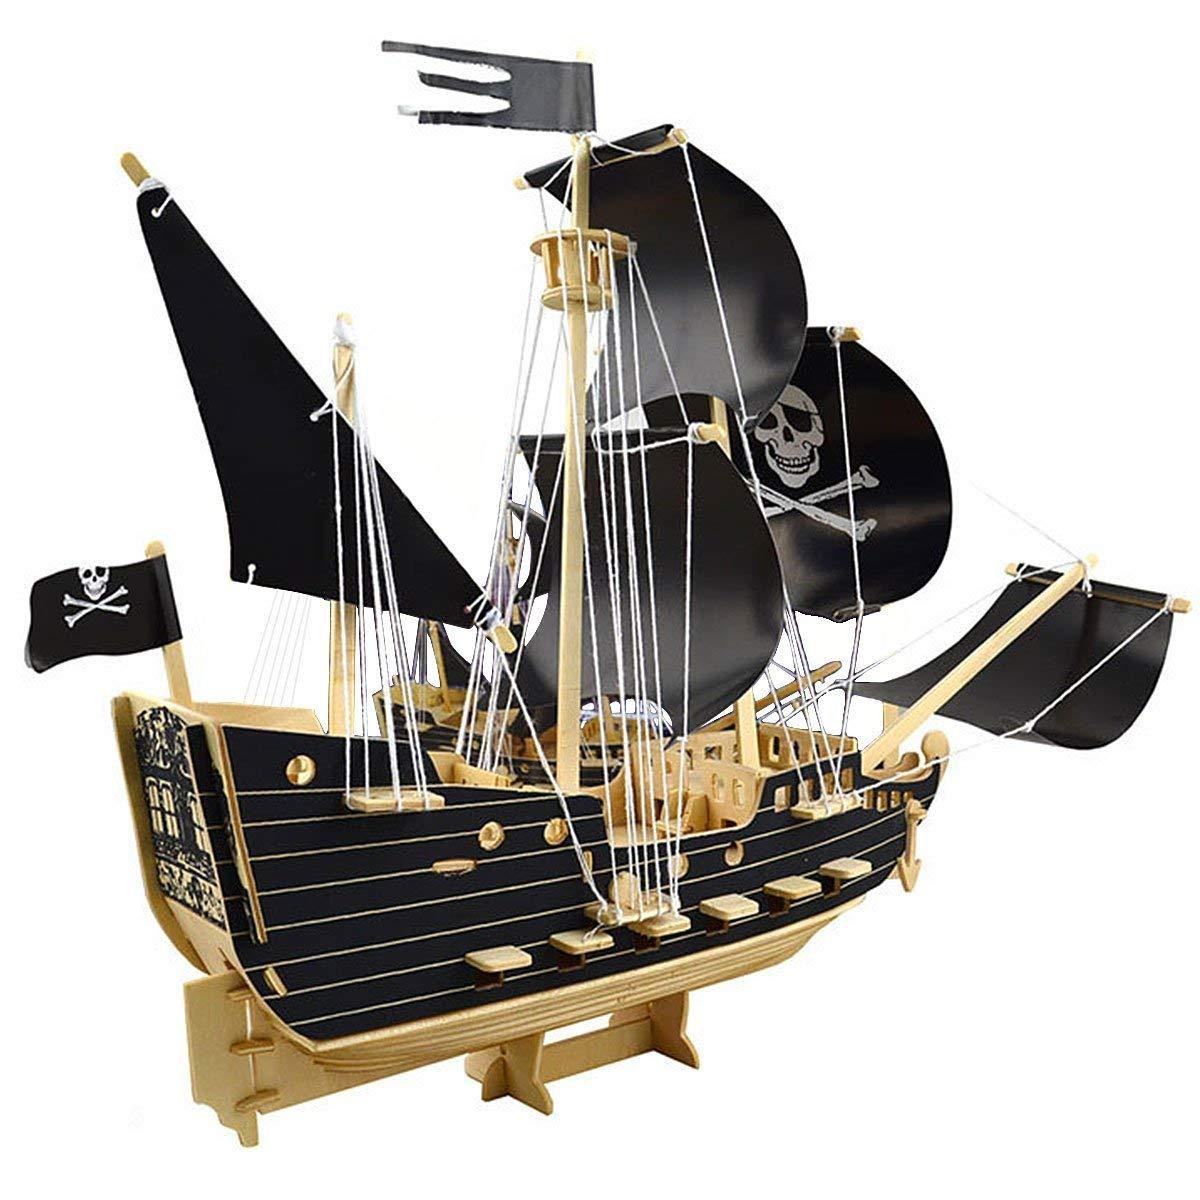 Papercraft Ship Pirate Ship Wooden Models 3d Wooden Sailing Ships Models Puzzle